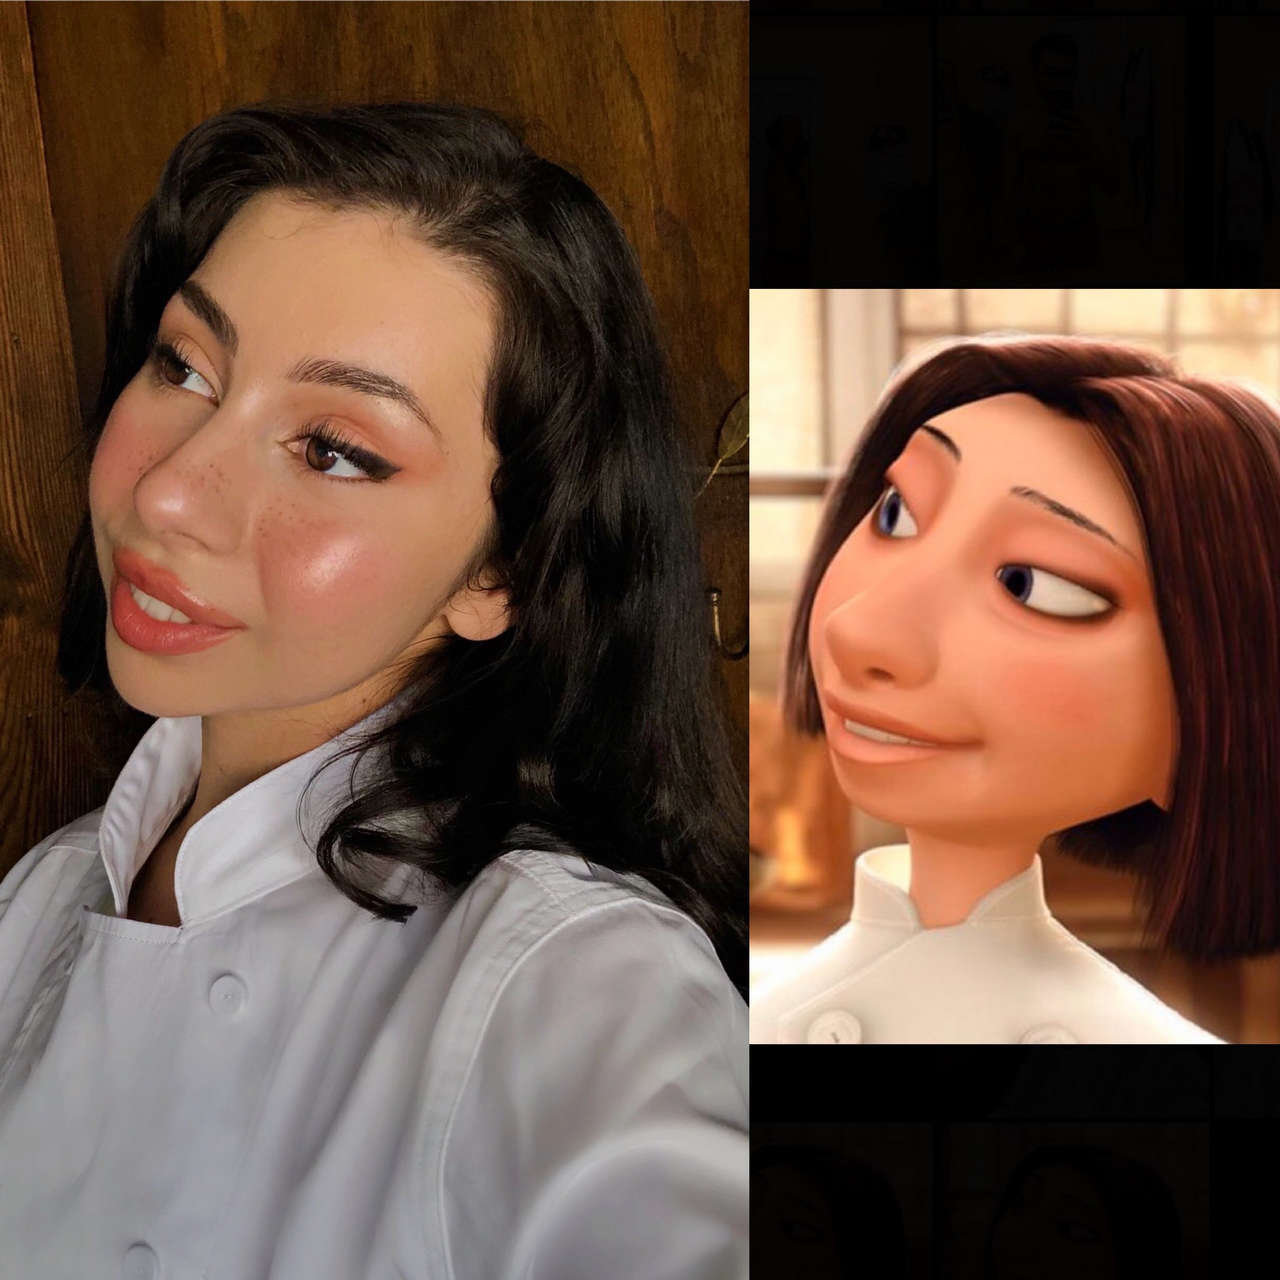 Colette Tatou From Ratatouille By Ehmaw